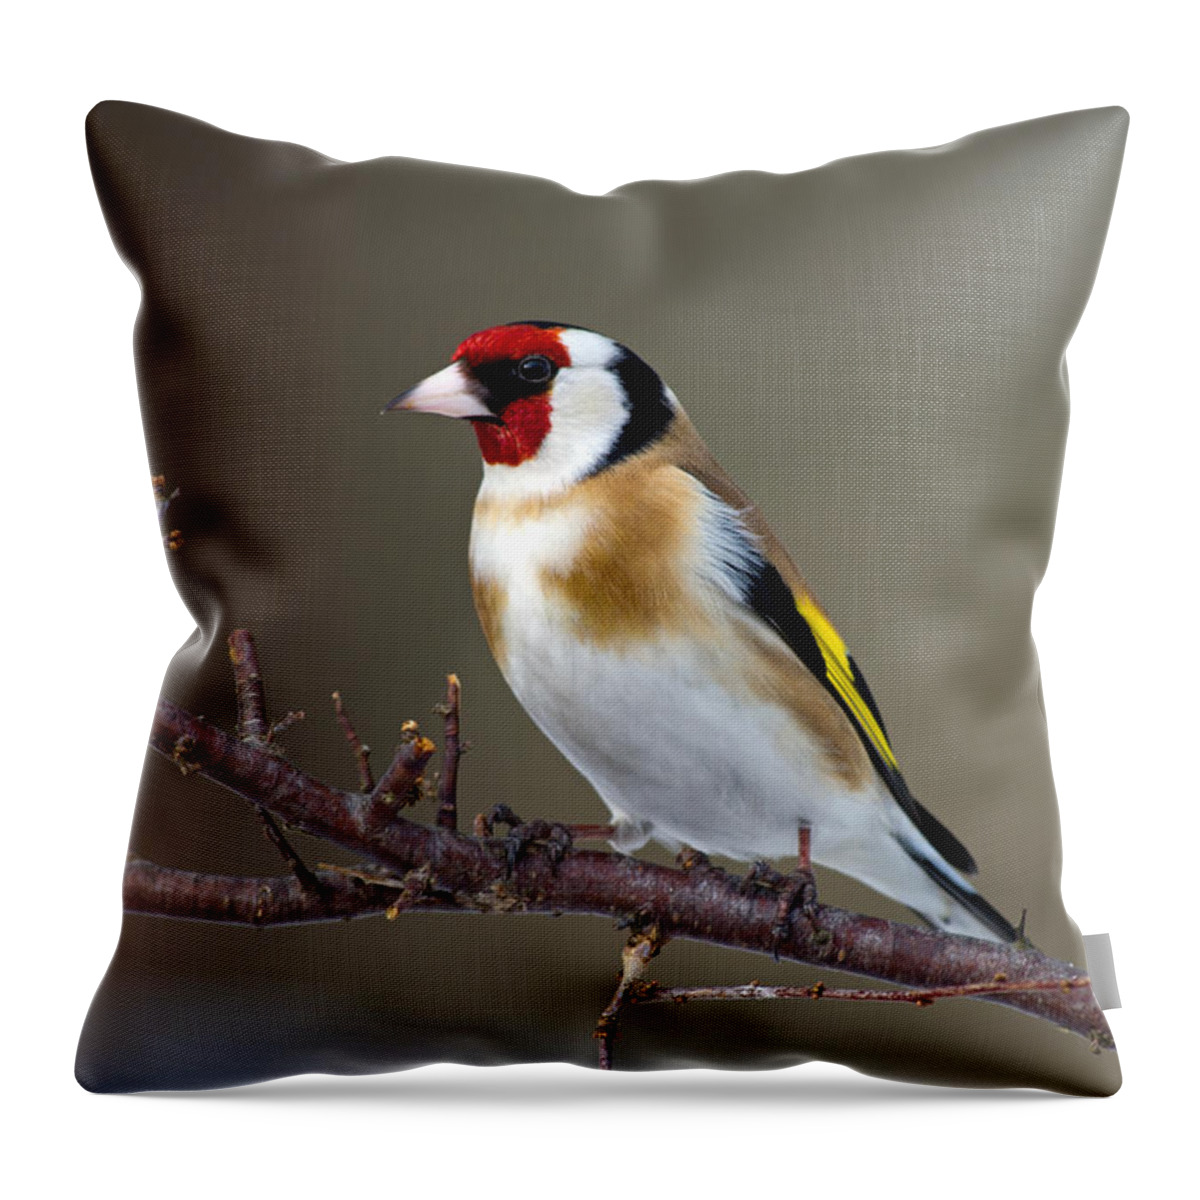 Goldfinch Throw Pillow featuring the photograph European Goldfinch by Torbjorn Swenelius